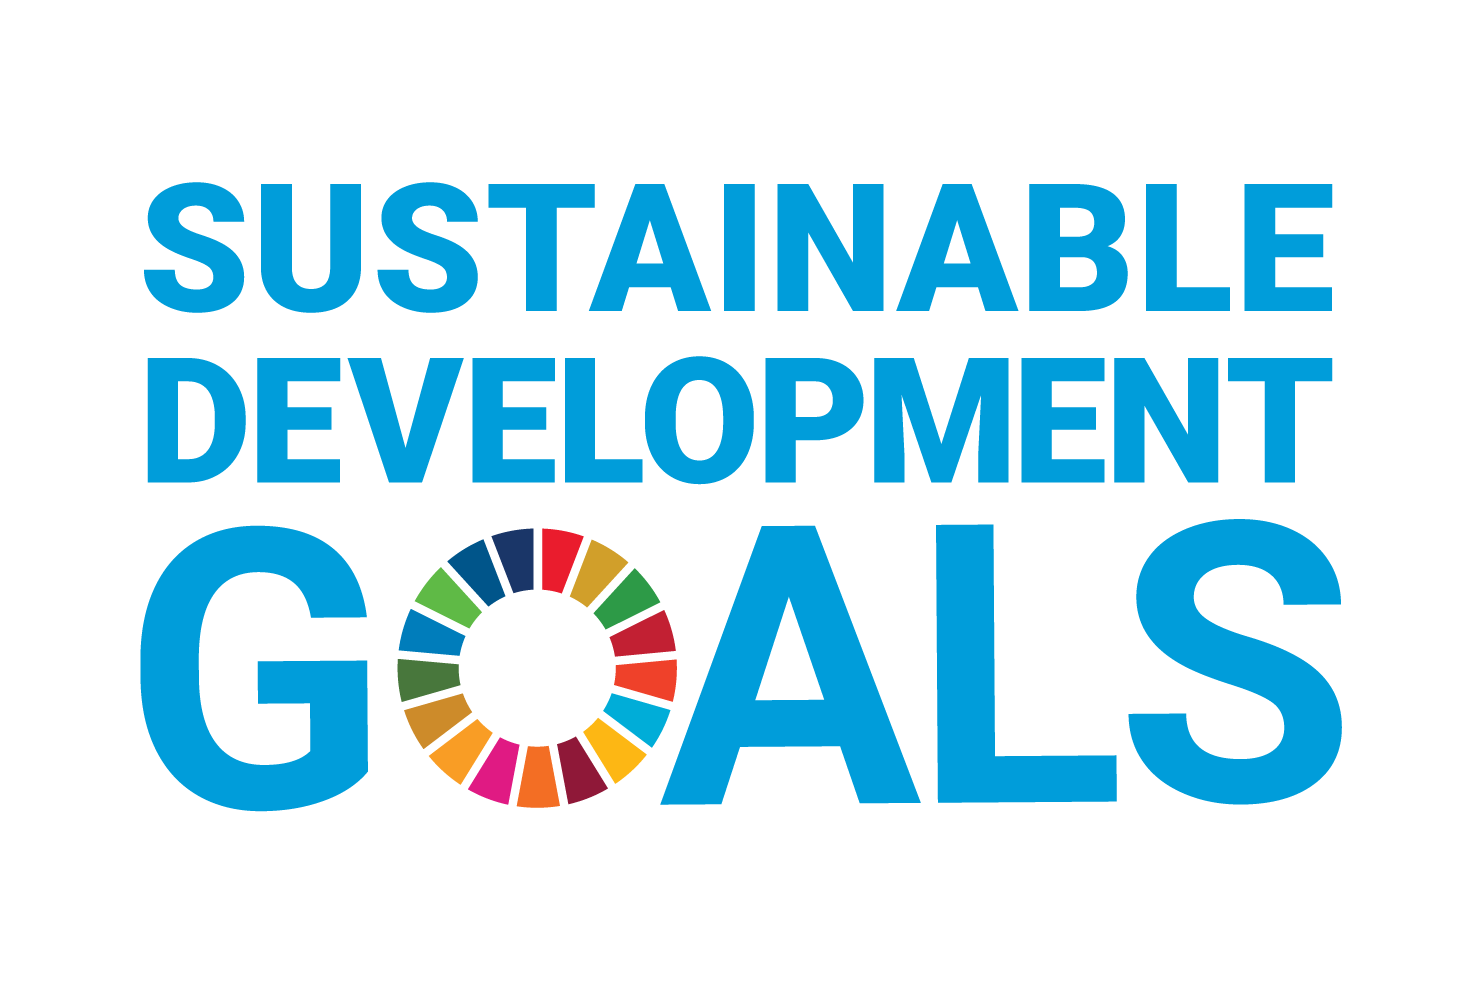 United Nations Sustainable Development Goals image with 17 colour representations of the letter O in Goals